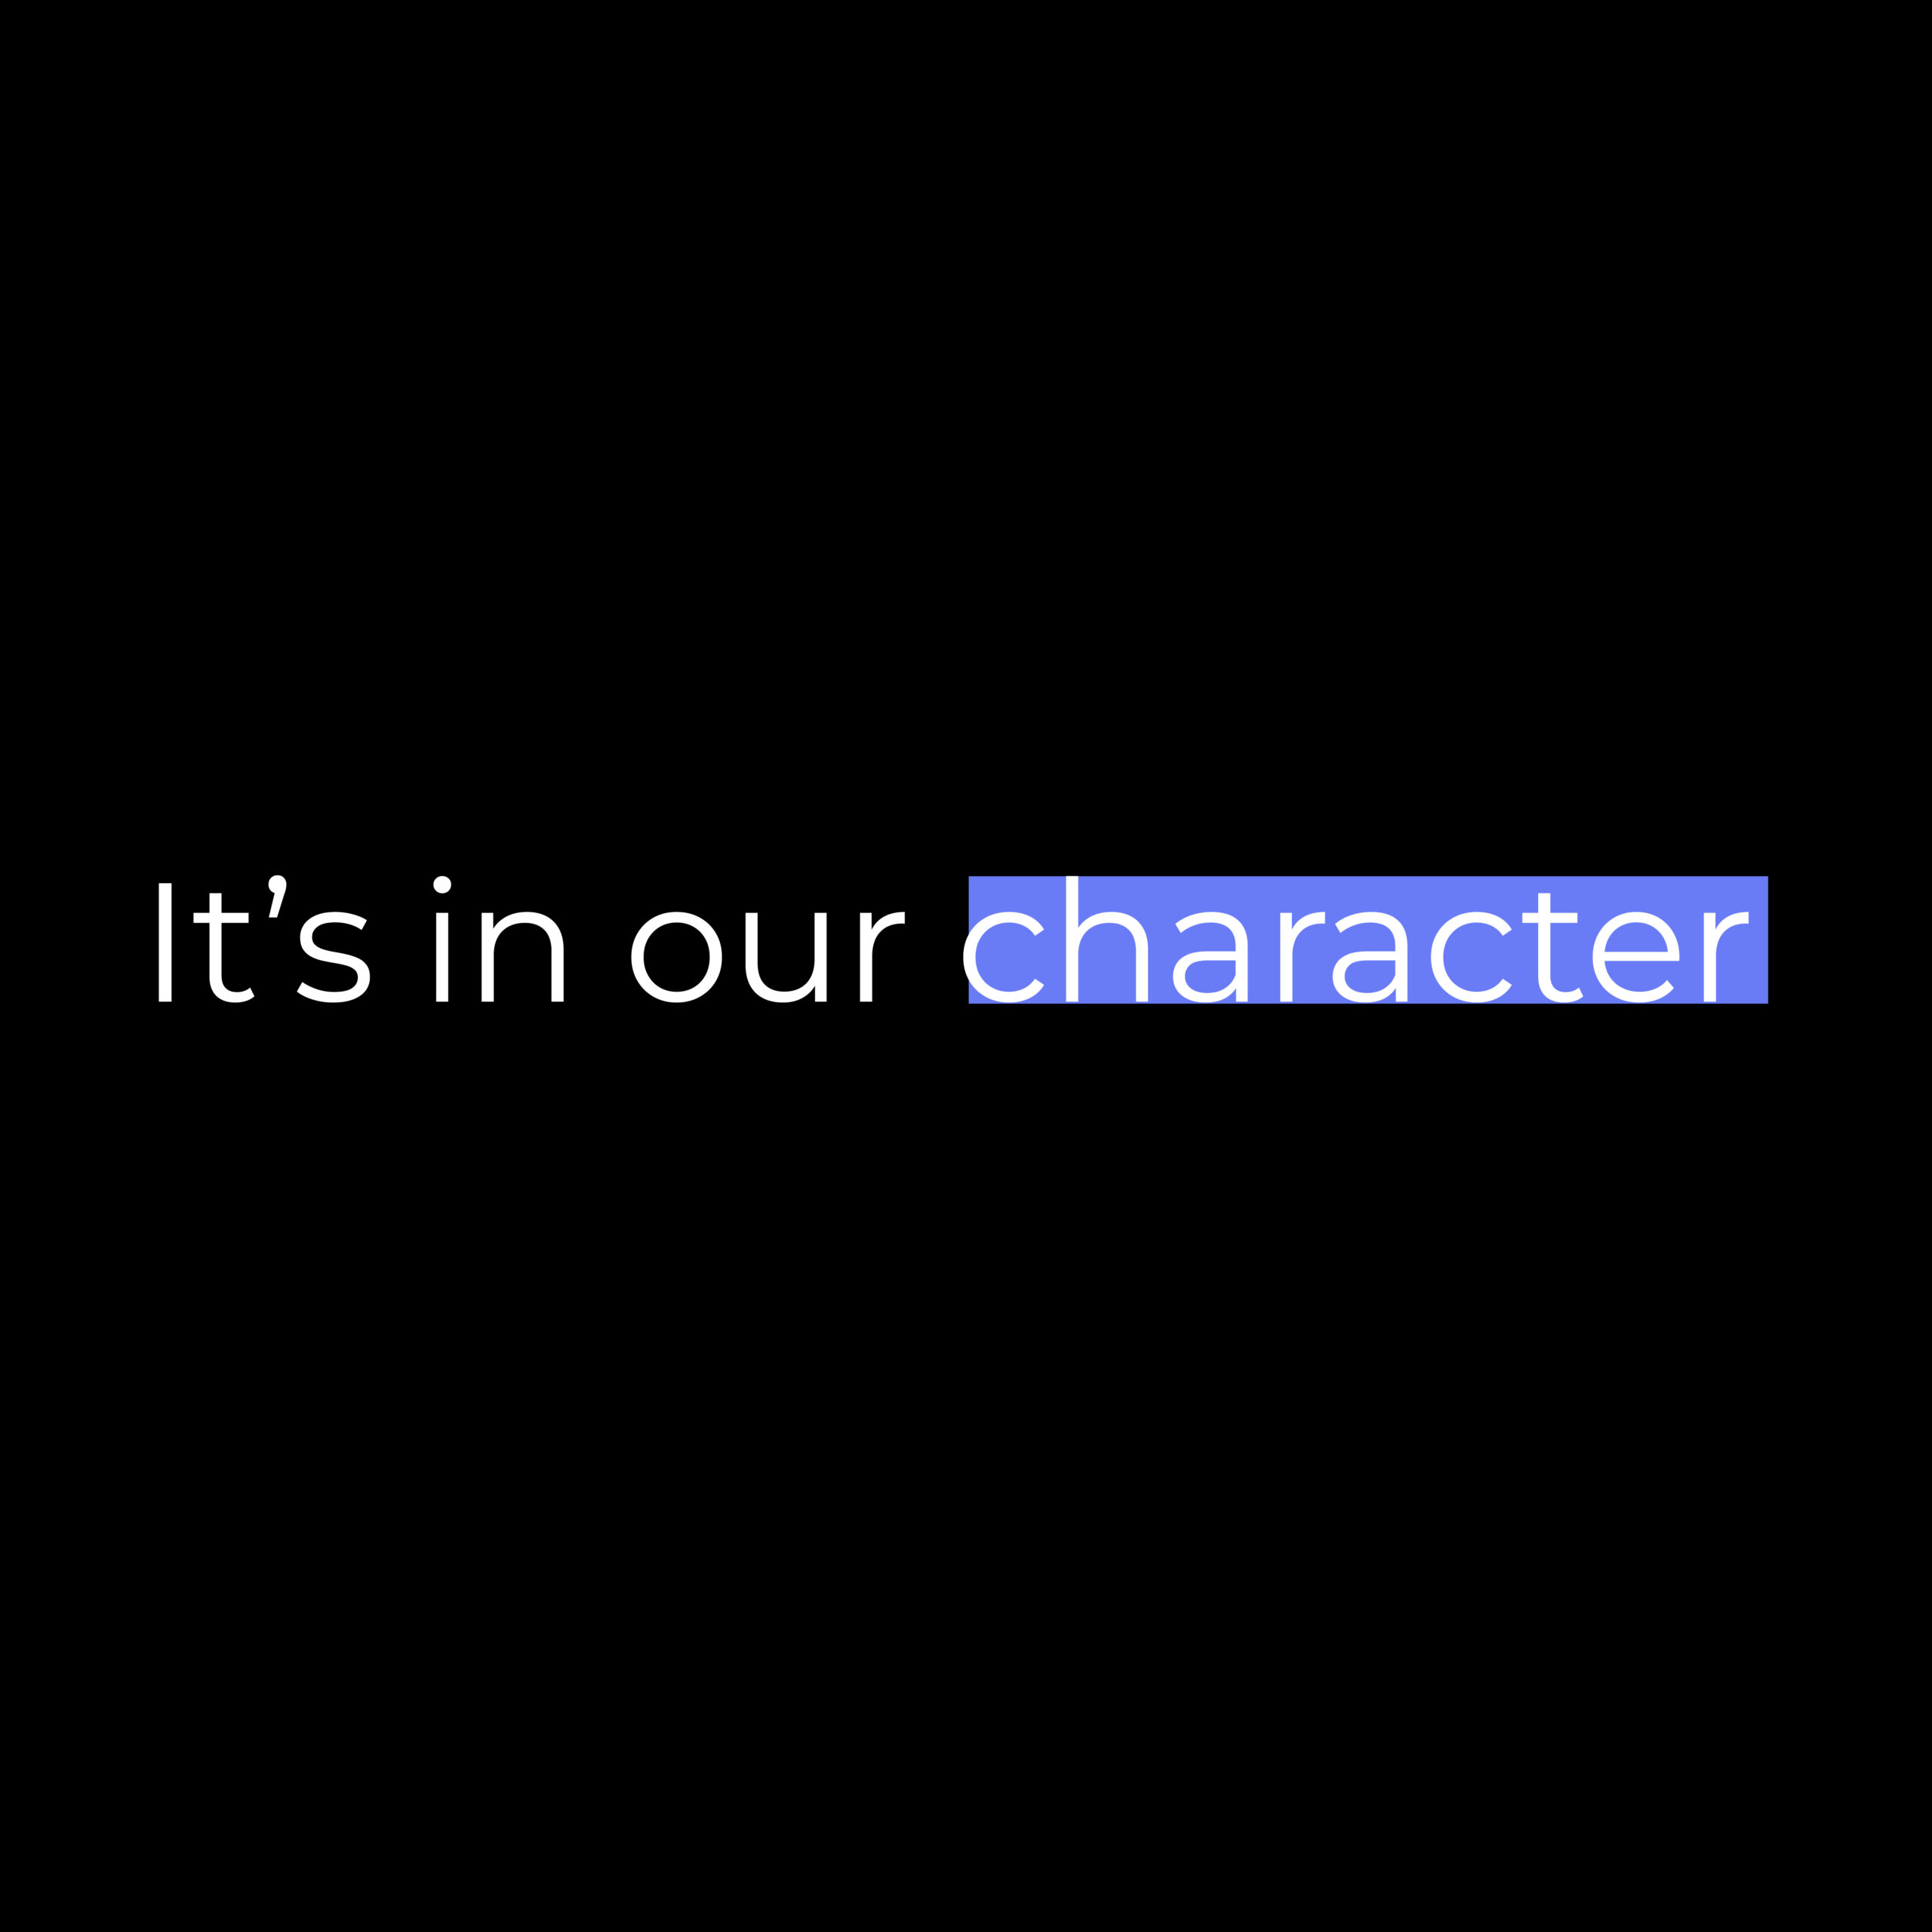 It's in our character